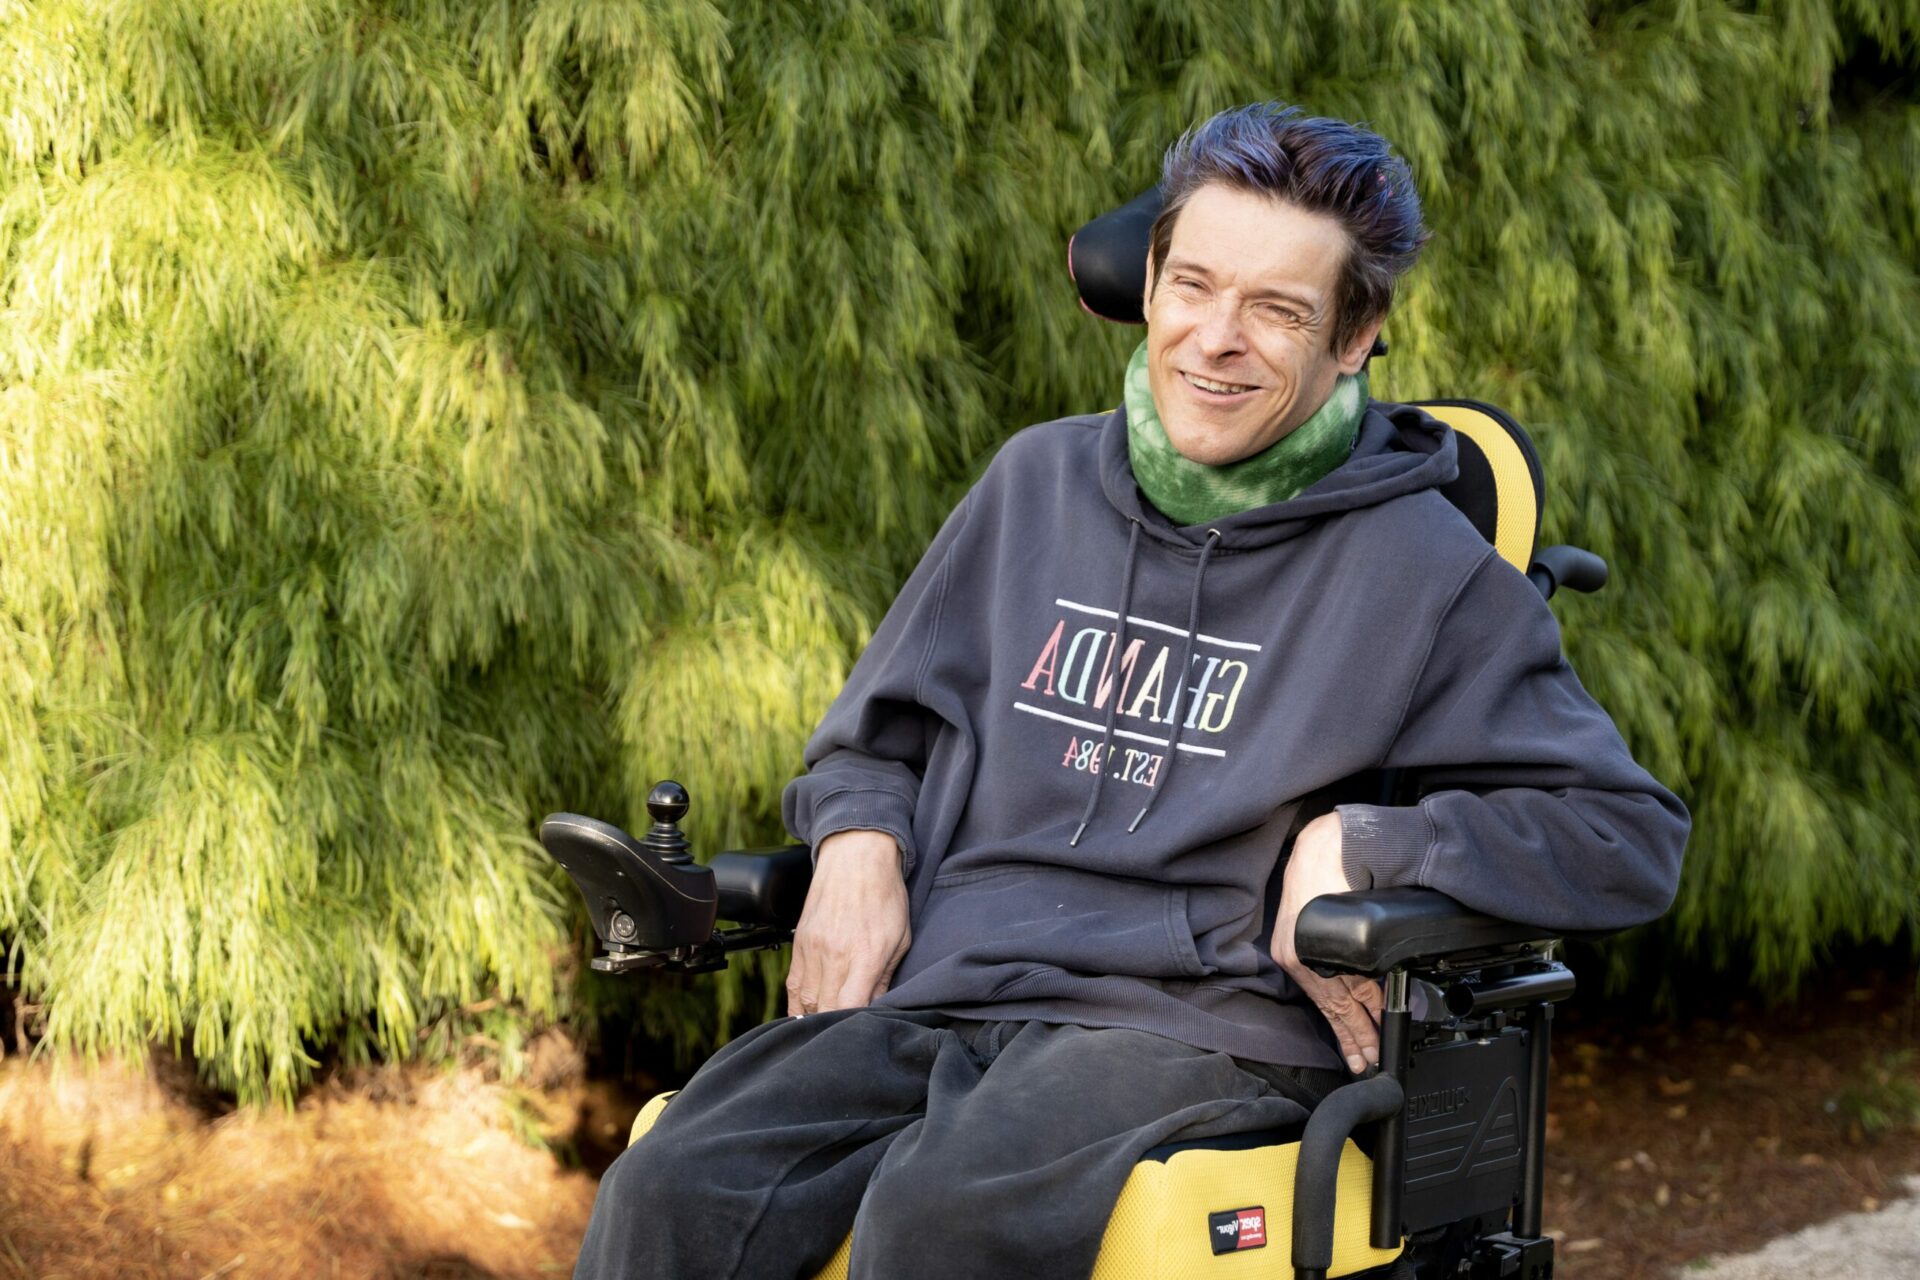 Disability advocate Patrick Eadington in his mobility chair outside with a green hedge in the background.